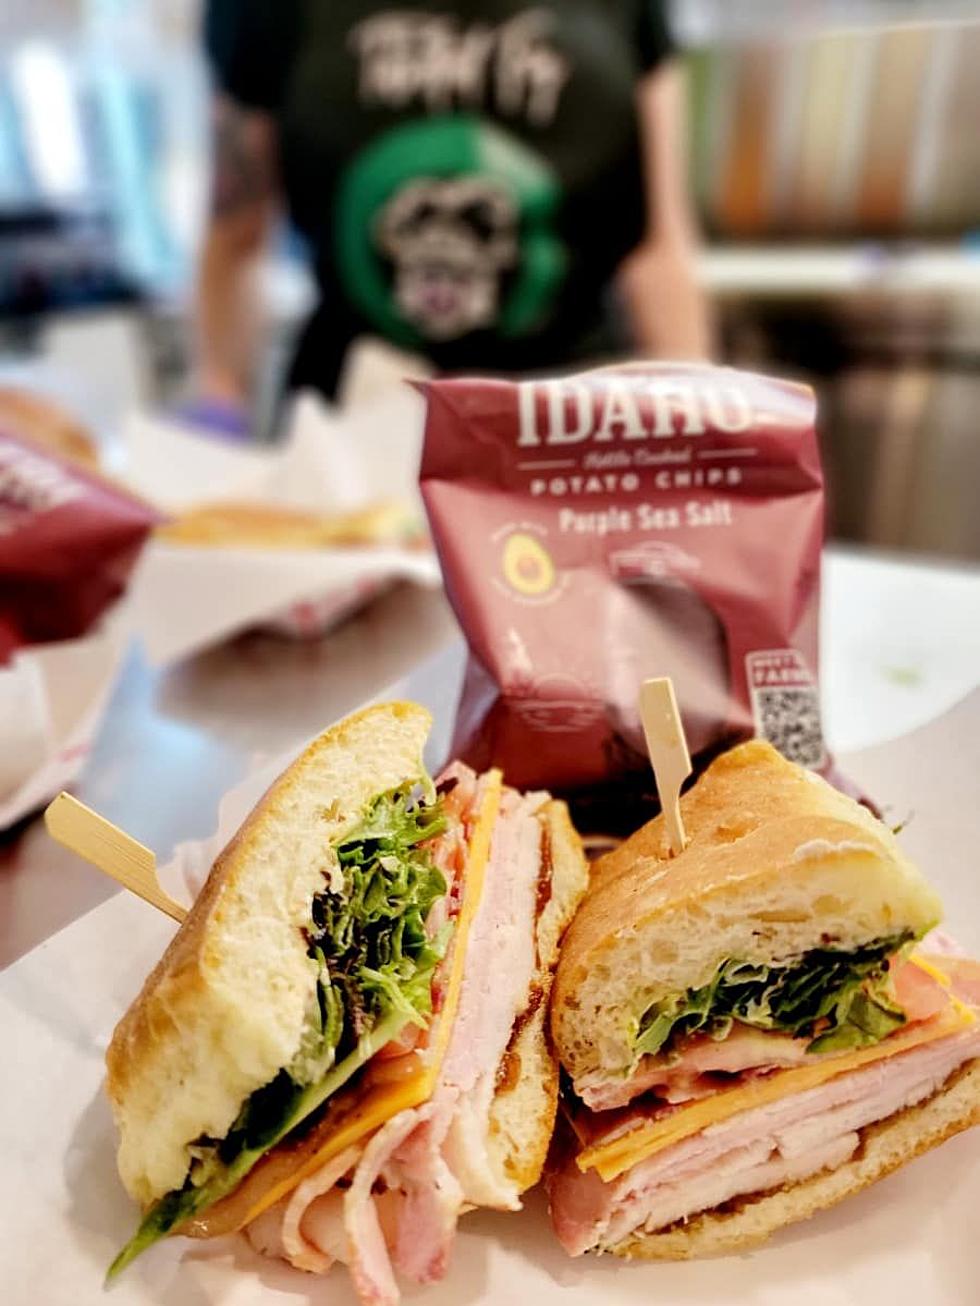 People Are Calling This The Best Sandwich Shop In The Boise Area